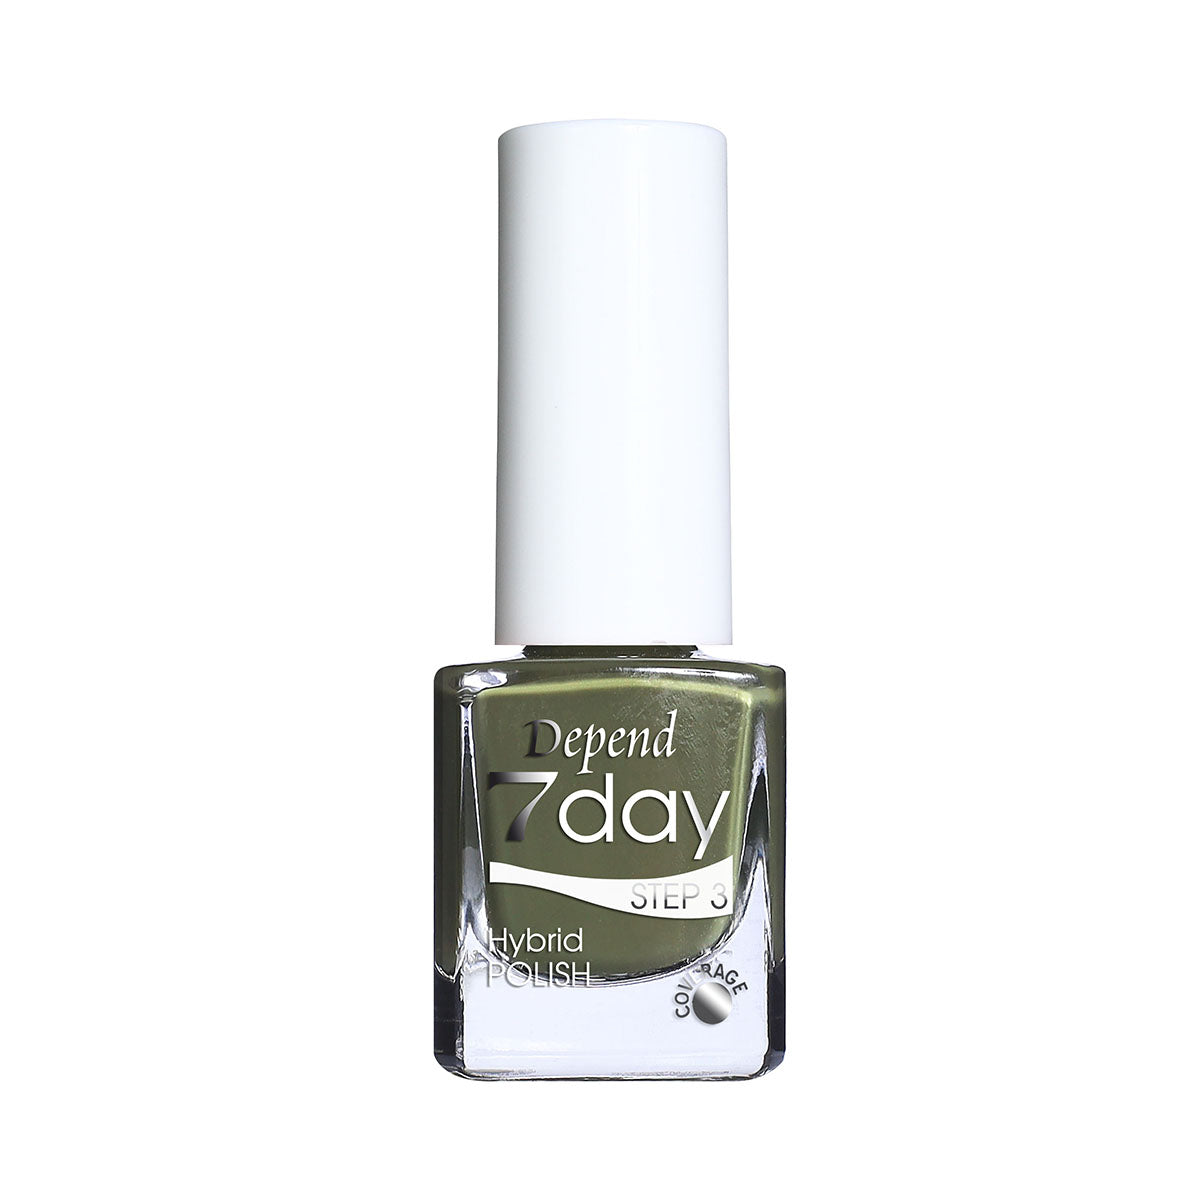 Depend 7day
Hybrid Polish 7224 Relax, just Do it